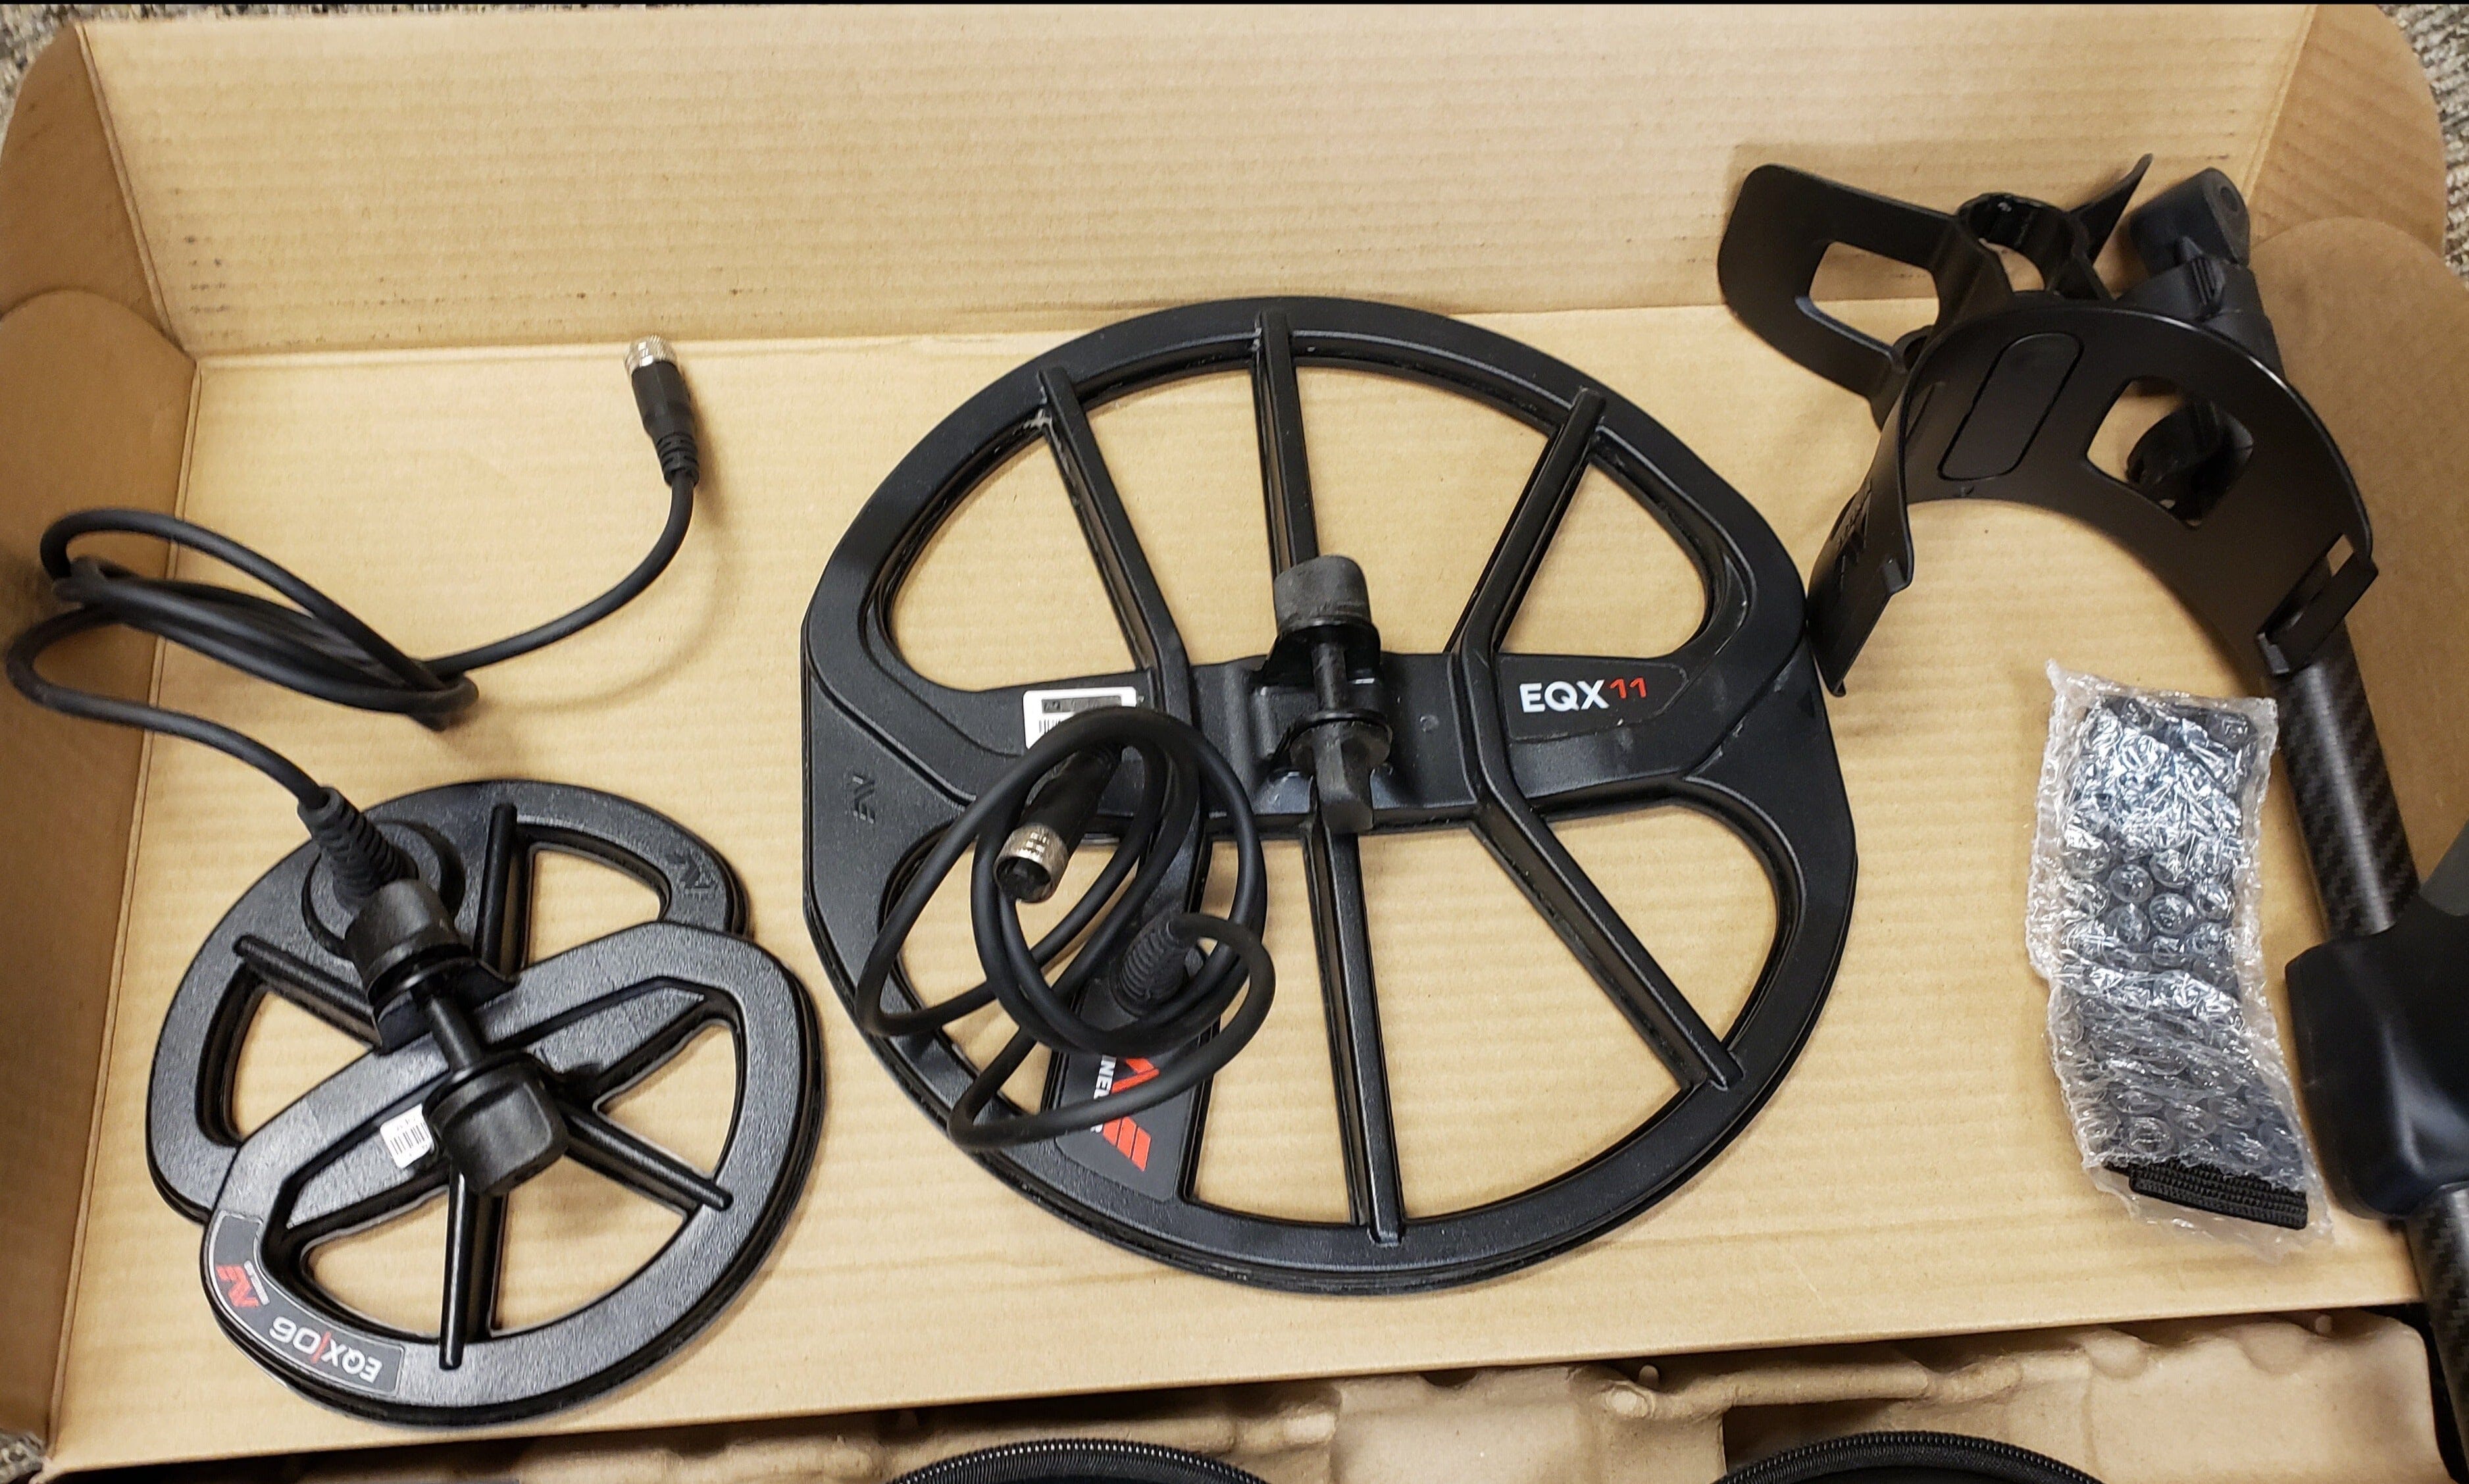 Returned, Factory Refurbished Minelab Equinox 900 - Includes Two Coils, Wireless Headphones